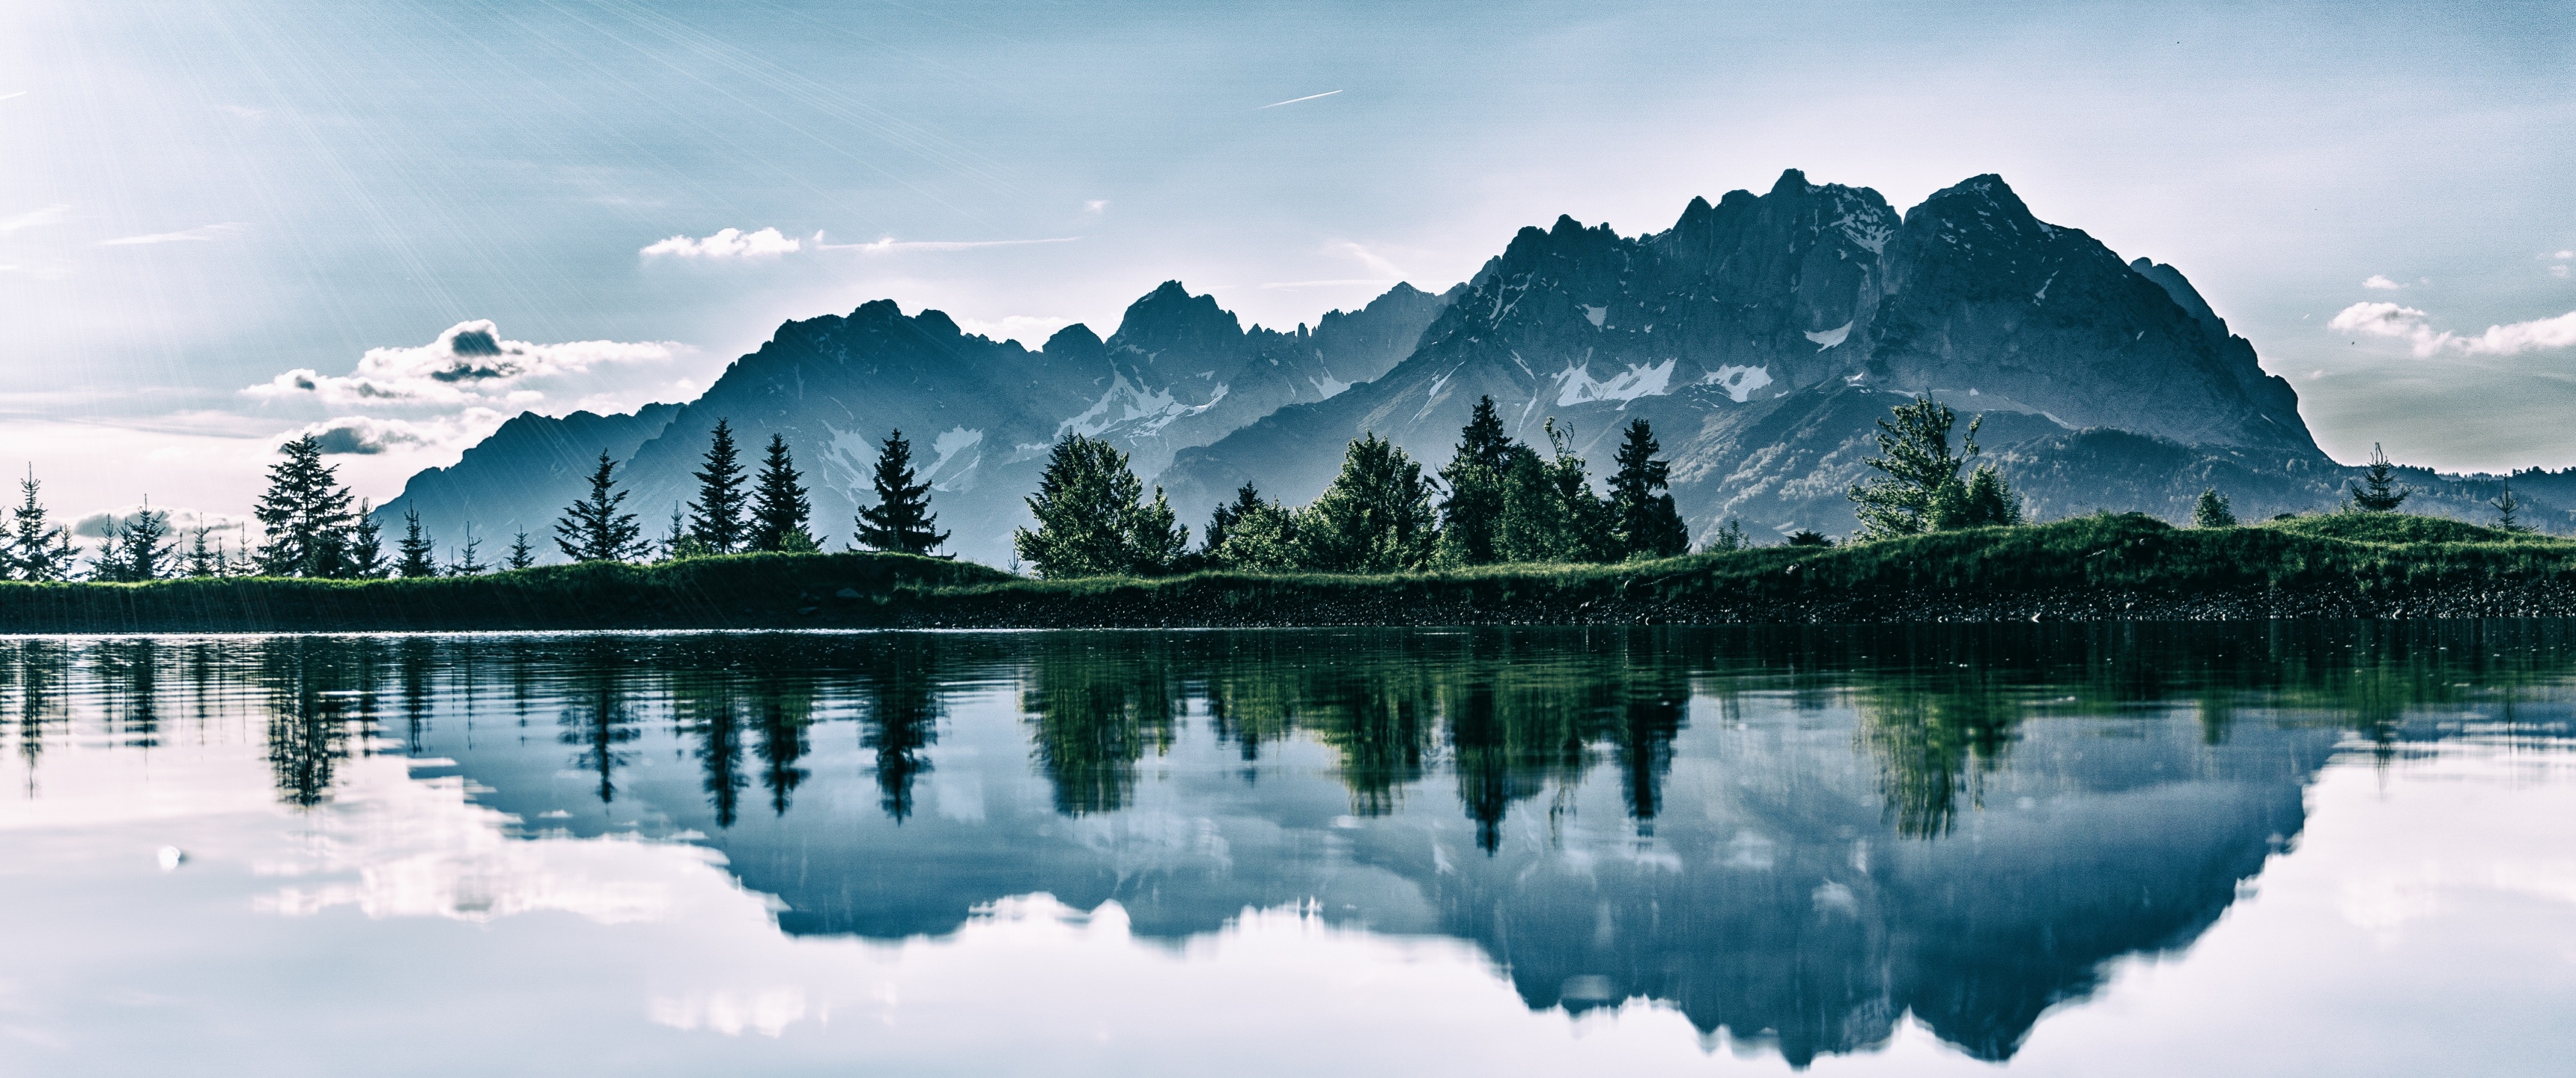 General 3440x1440 mountains pine trees lake nature clouds sun rays grass water reflection trees